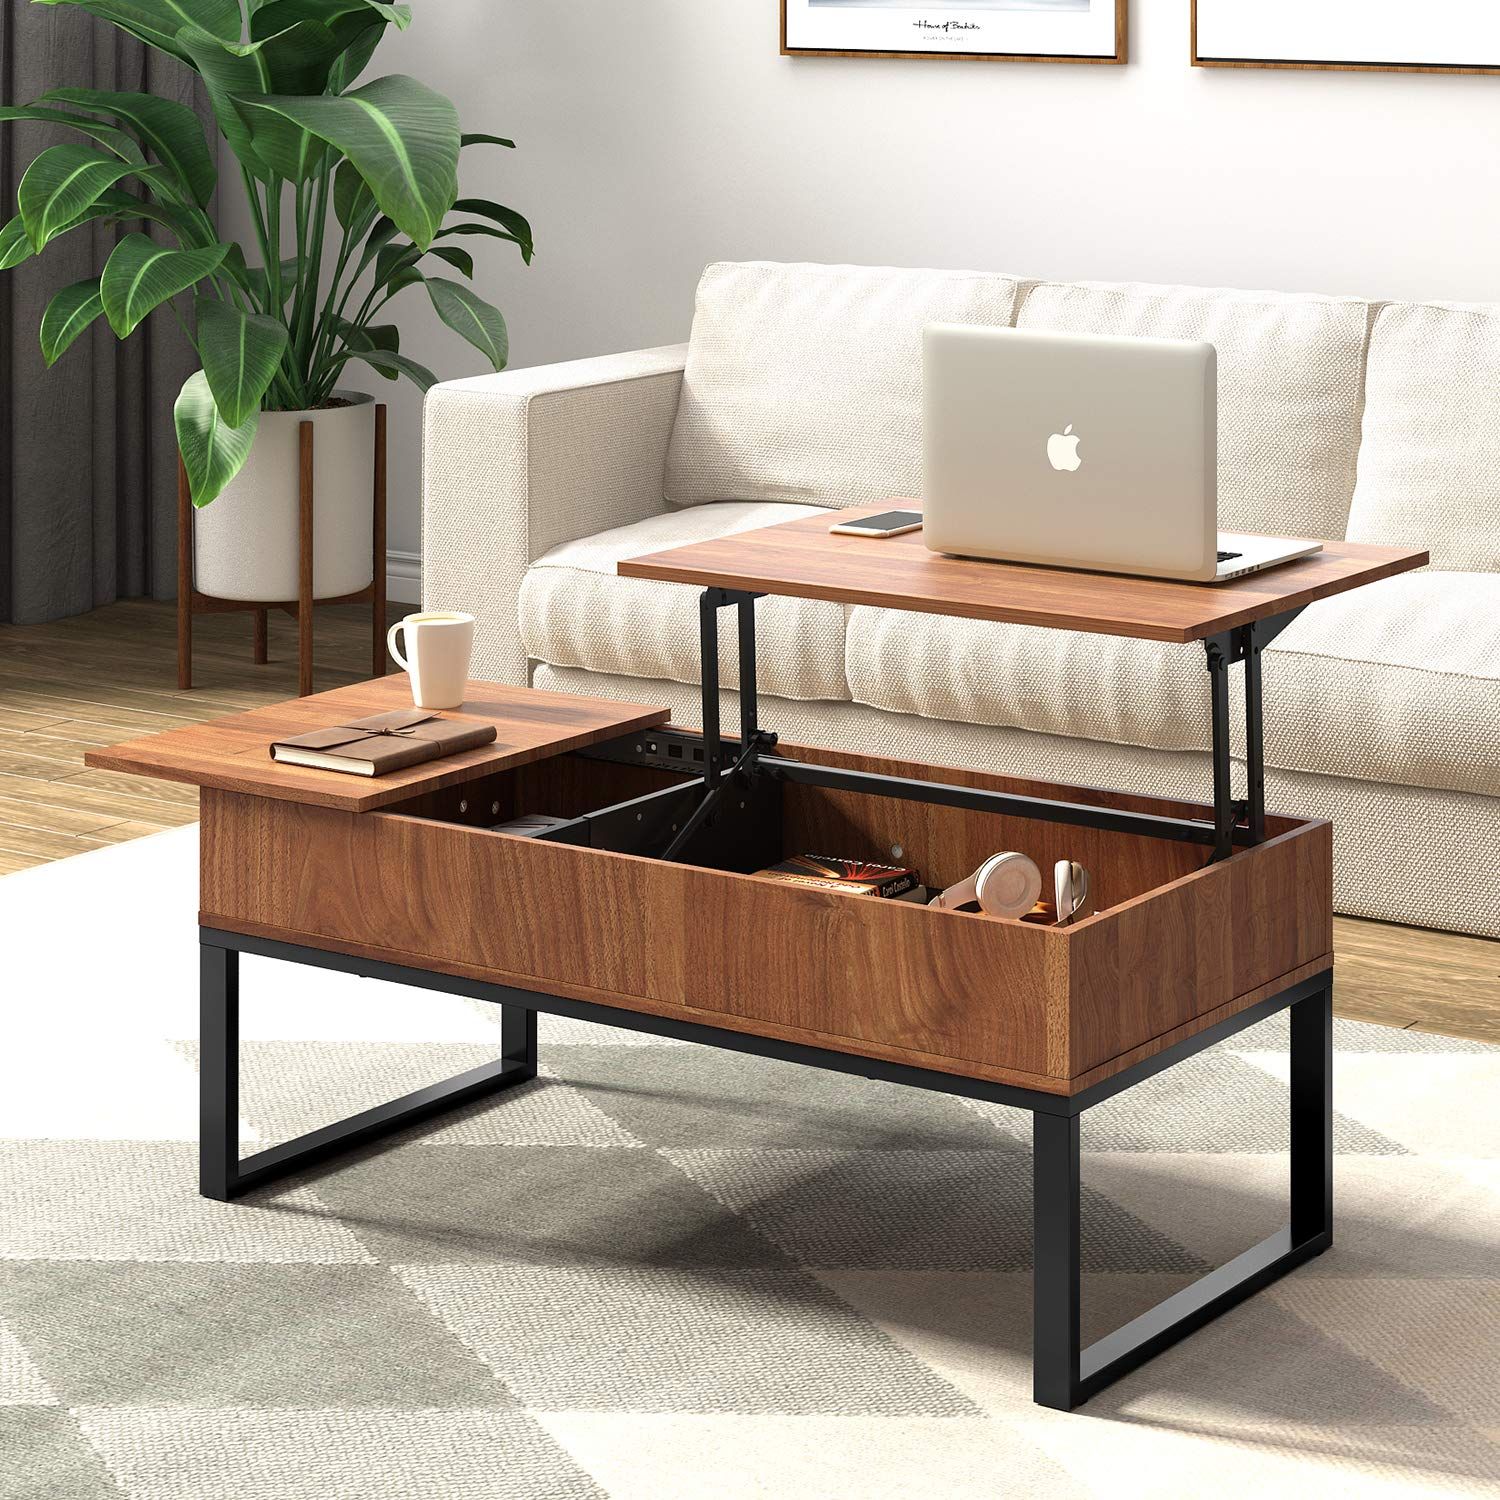 Wlive Wood Coffee Table With Adjustable Lift Top Table, Metal Frame Throughout Modern Coffee Tables With Hidden Storage Compartments (Gallery 8 of 20)